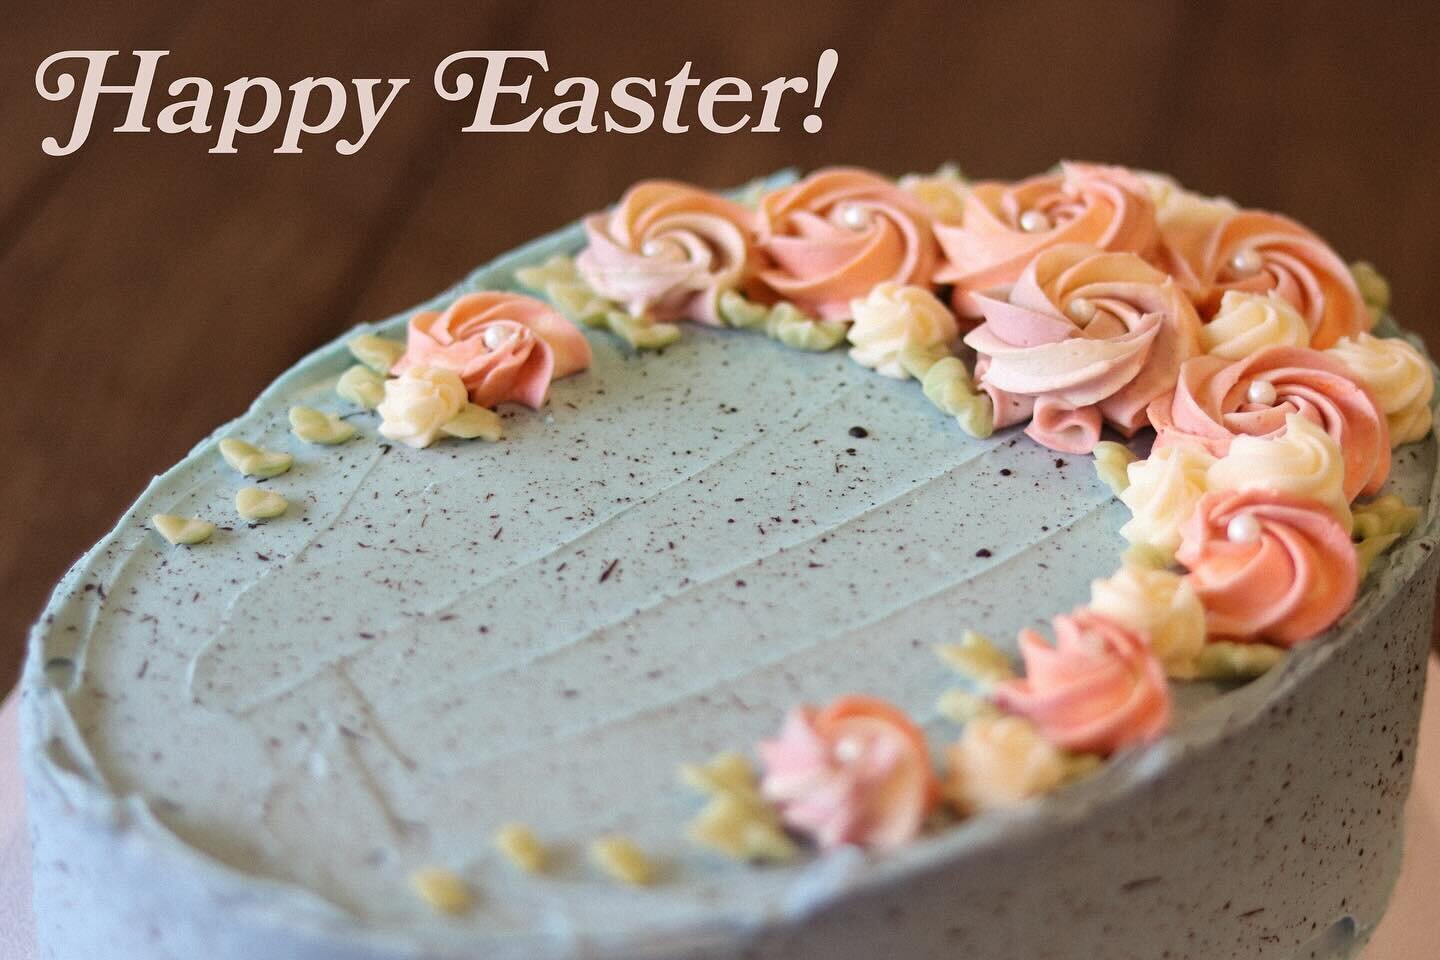 ✨Happy Easter✨ We will be closed today and we will be back open on Tuesday!